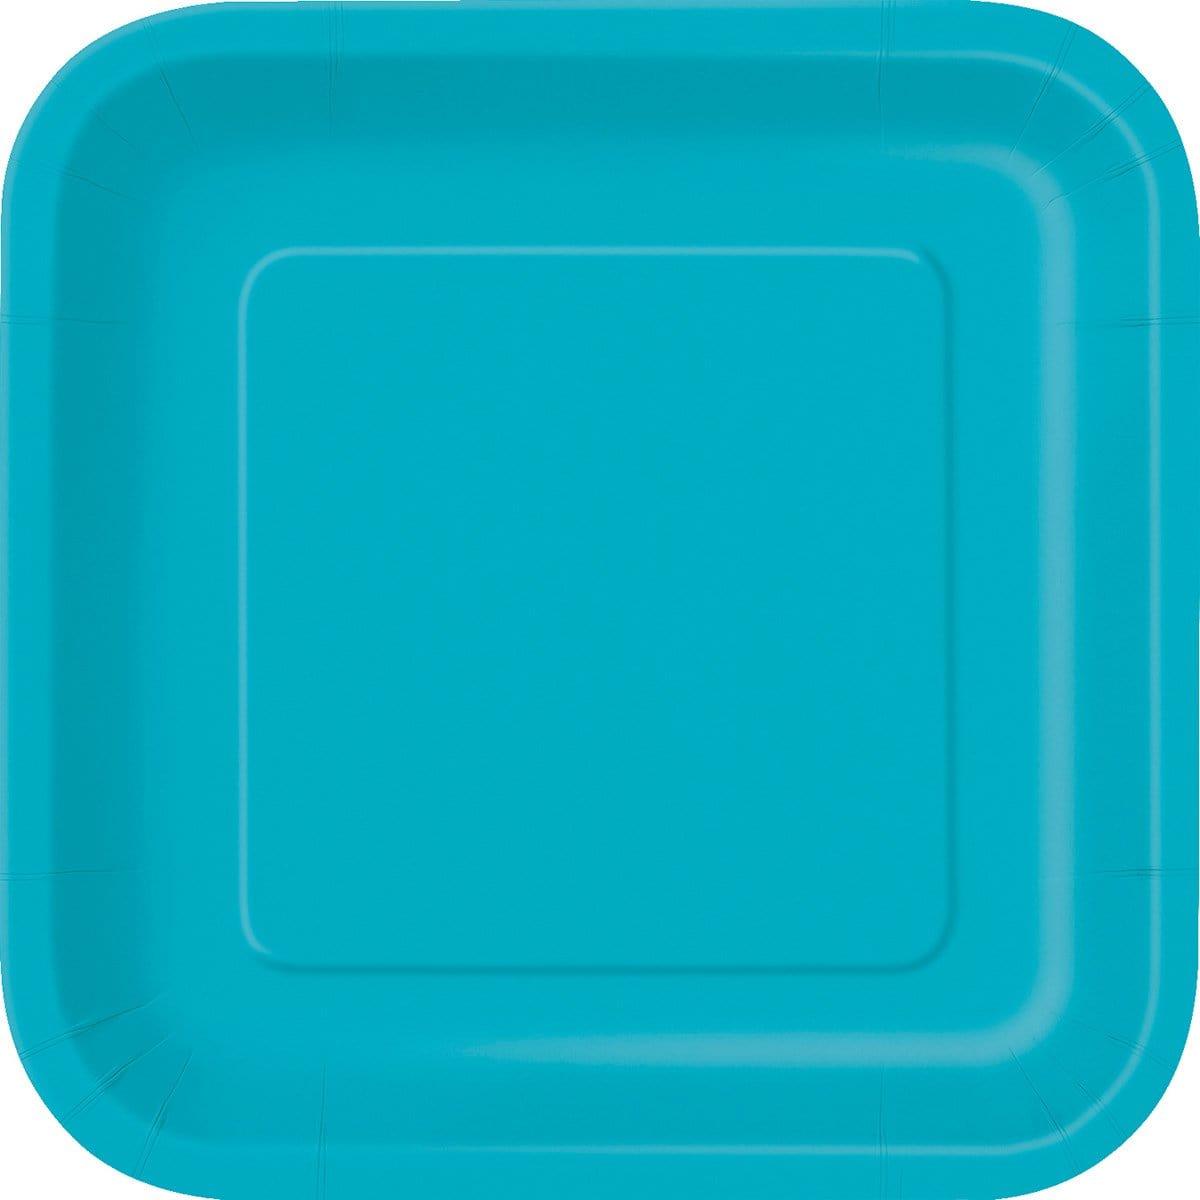 Buy Plasticware Square Paper Plates 7 In. - Caribbean 16/pkg. sold at Party Expert